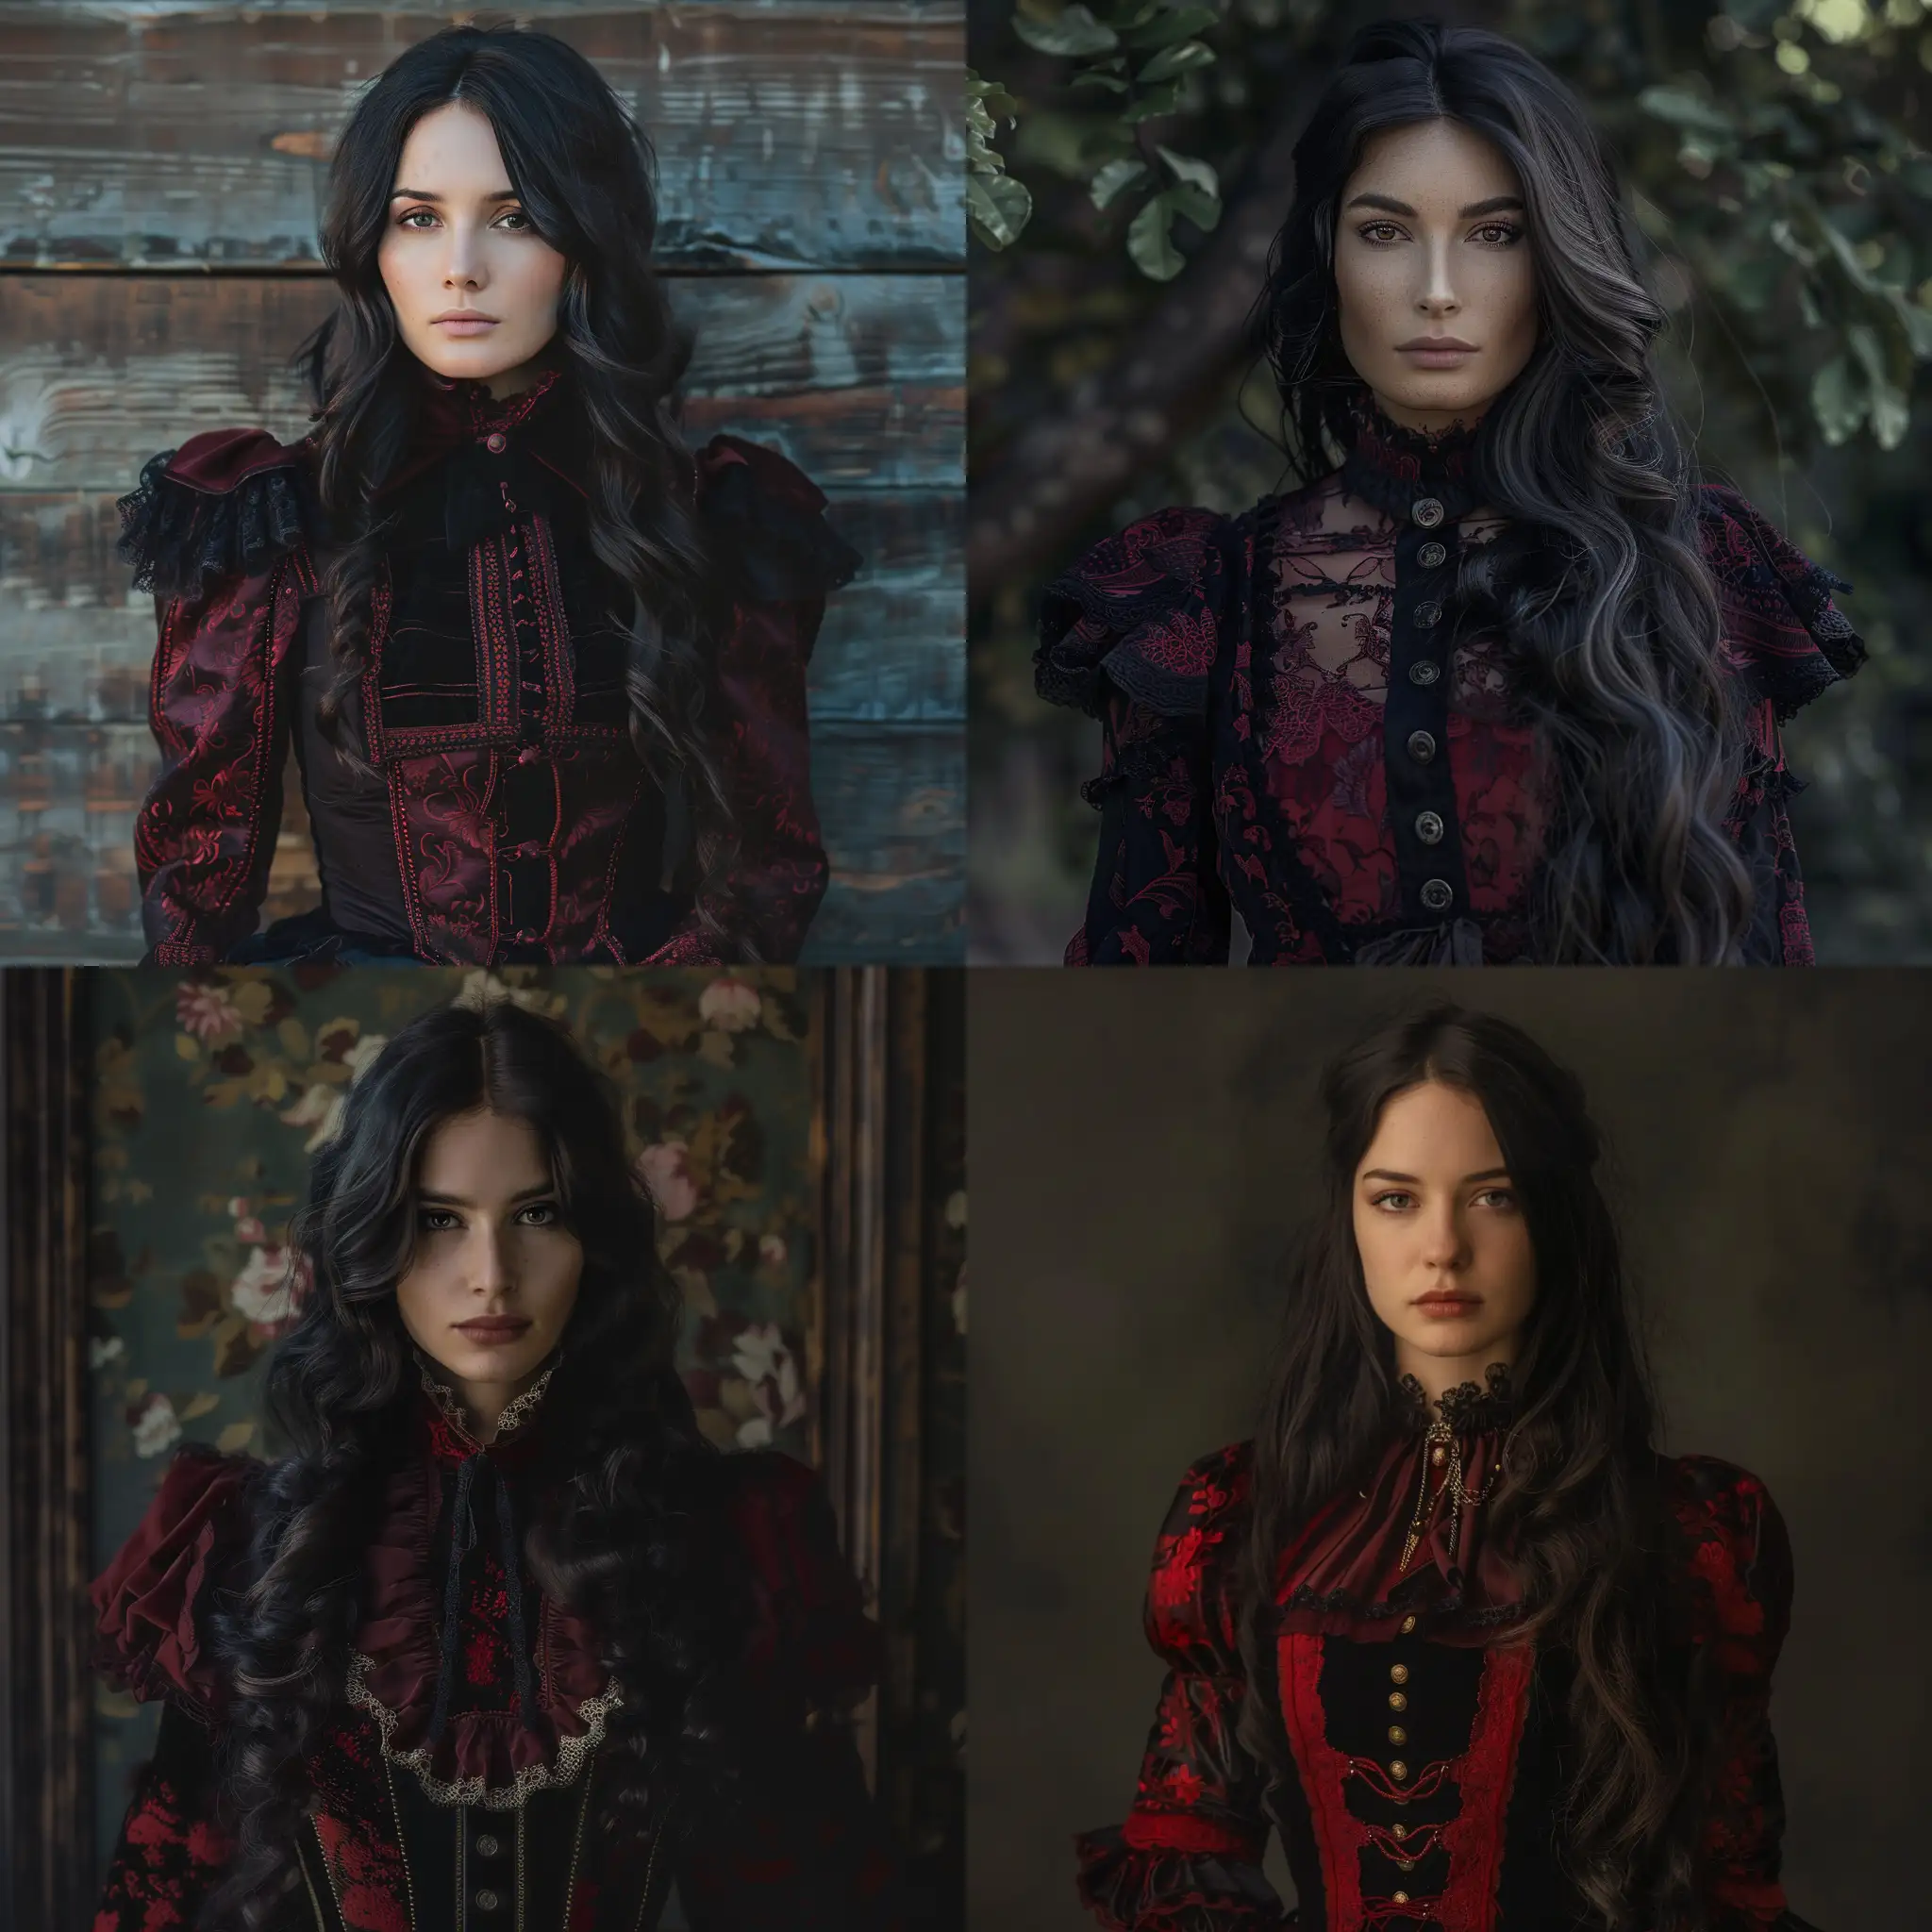 Young-Woman-in-Dark-Victorian-Attire-with-Long-Hair